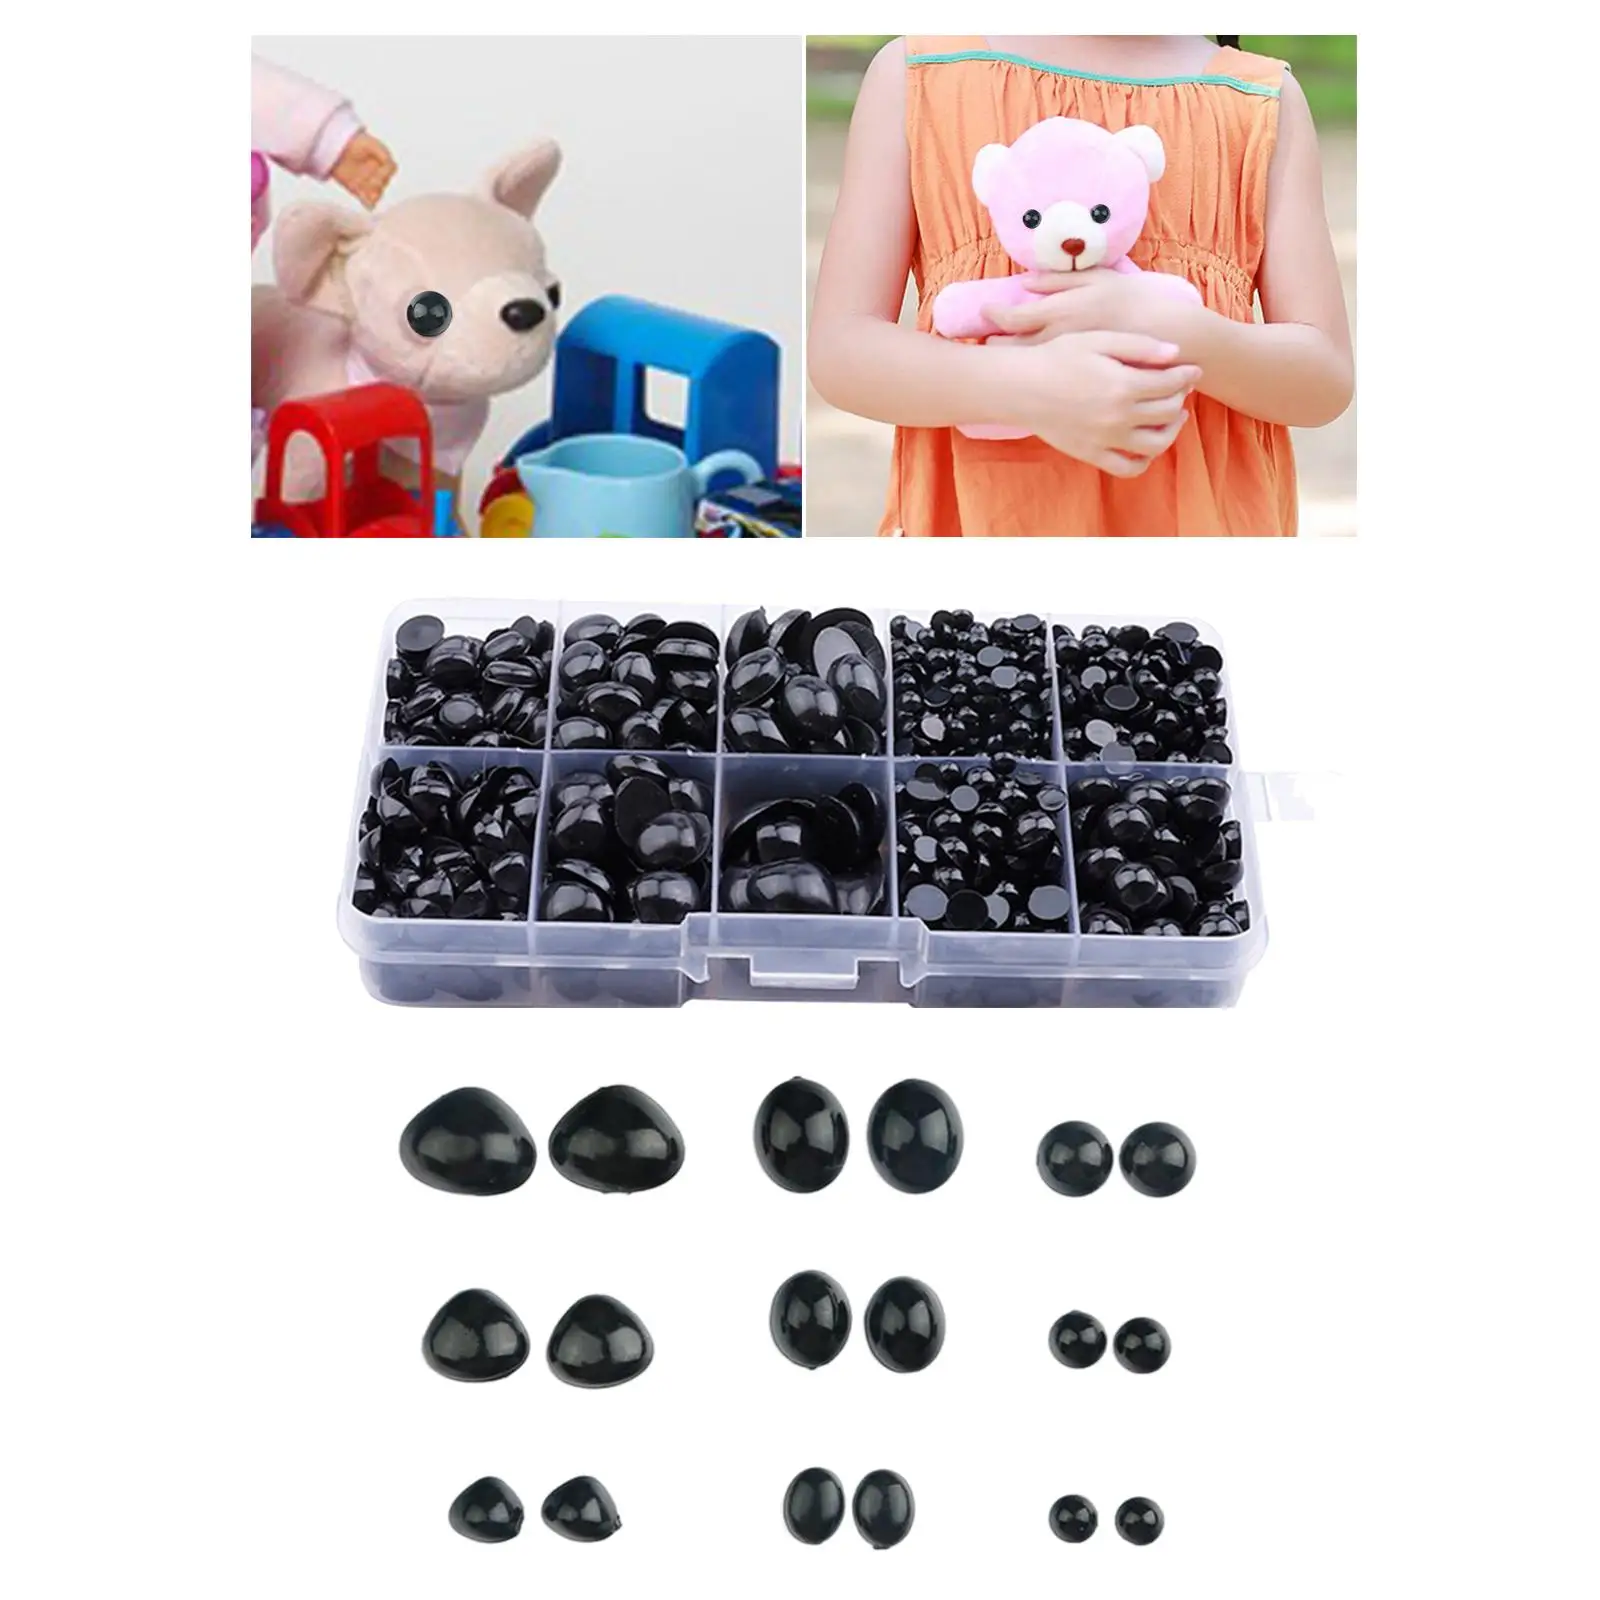 1000x Plastic Safety Eyes and Noses DIY Crafts Decoration Craft Doll Eyes for Puppet